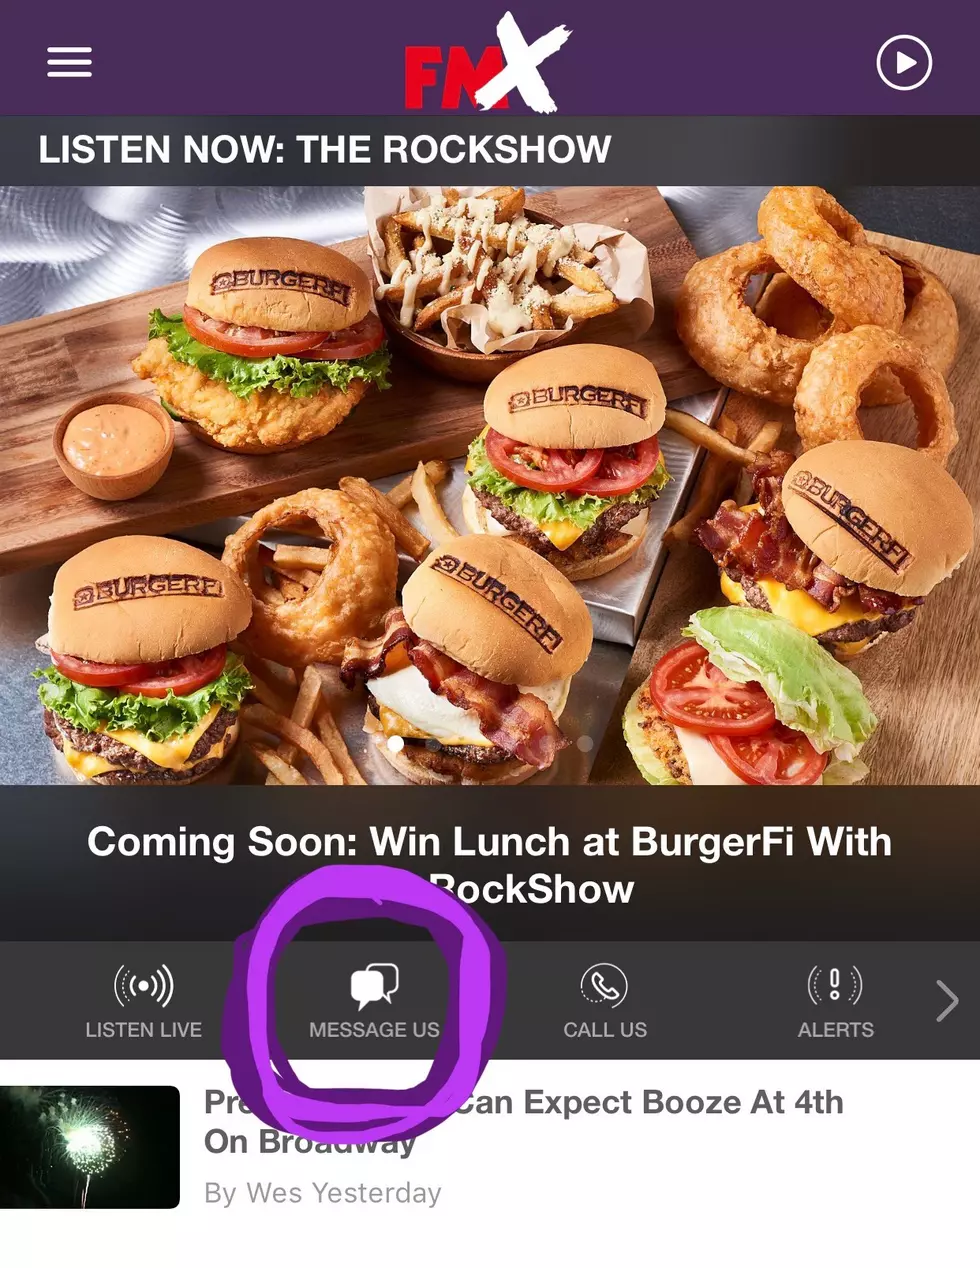 A New Way to Reach Out and Touch The RockShow: Message Us on the FMX App